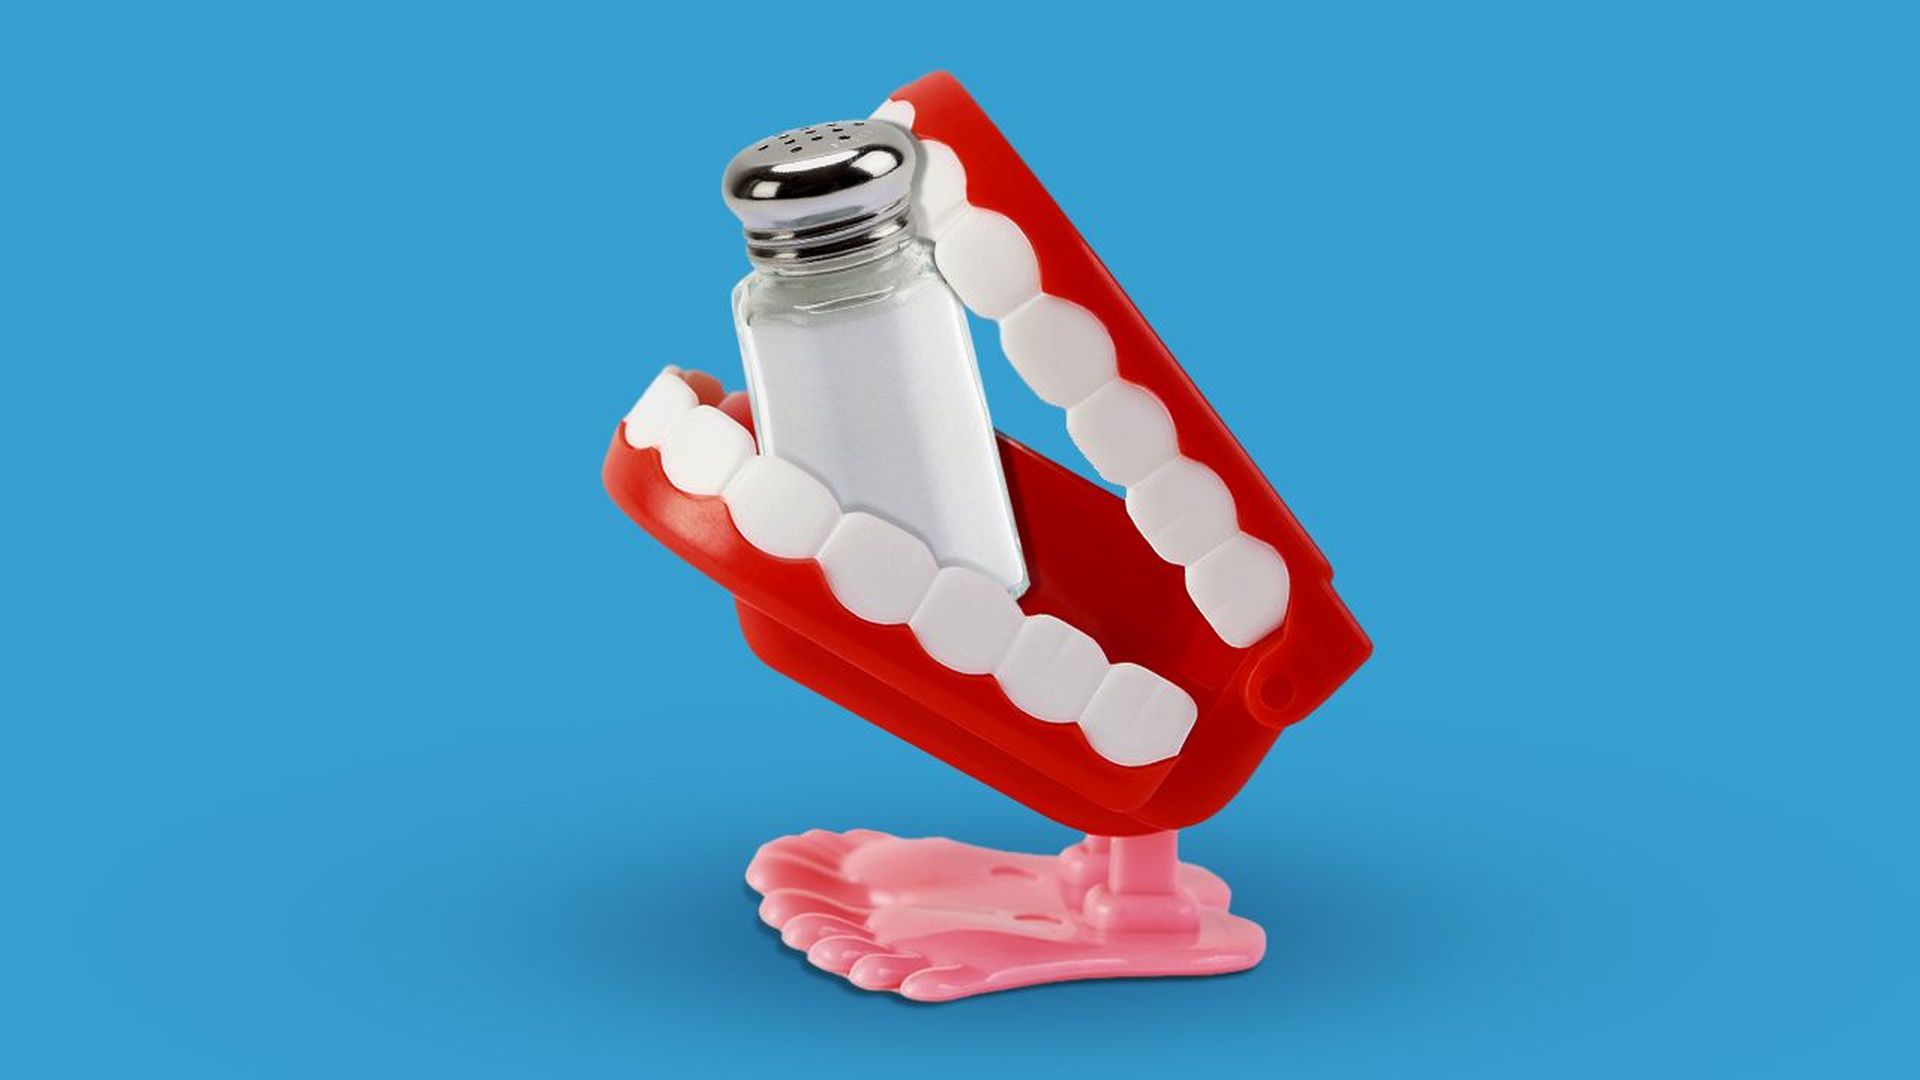 Illustration of toy teeth with a salt shaker between the set